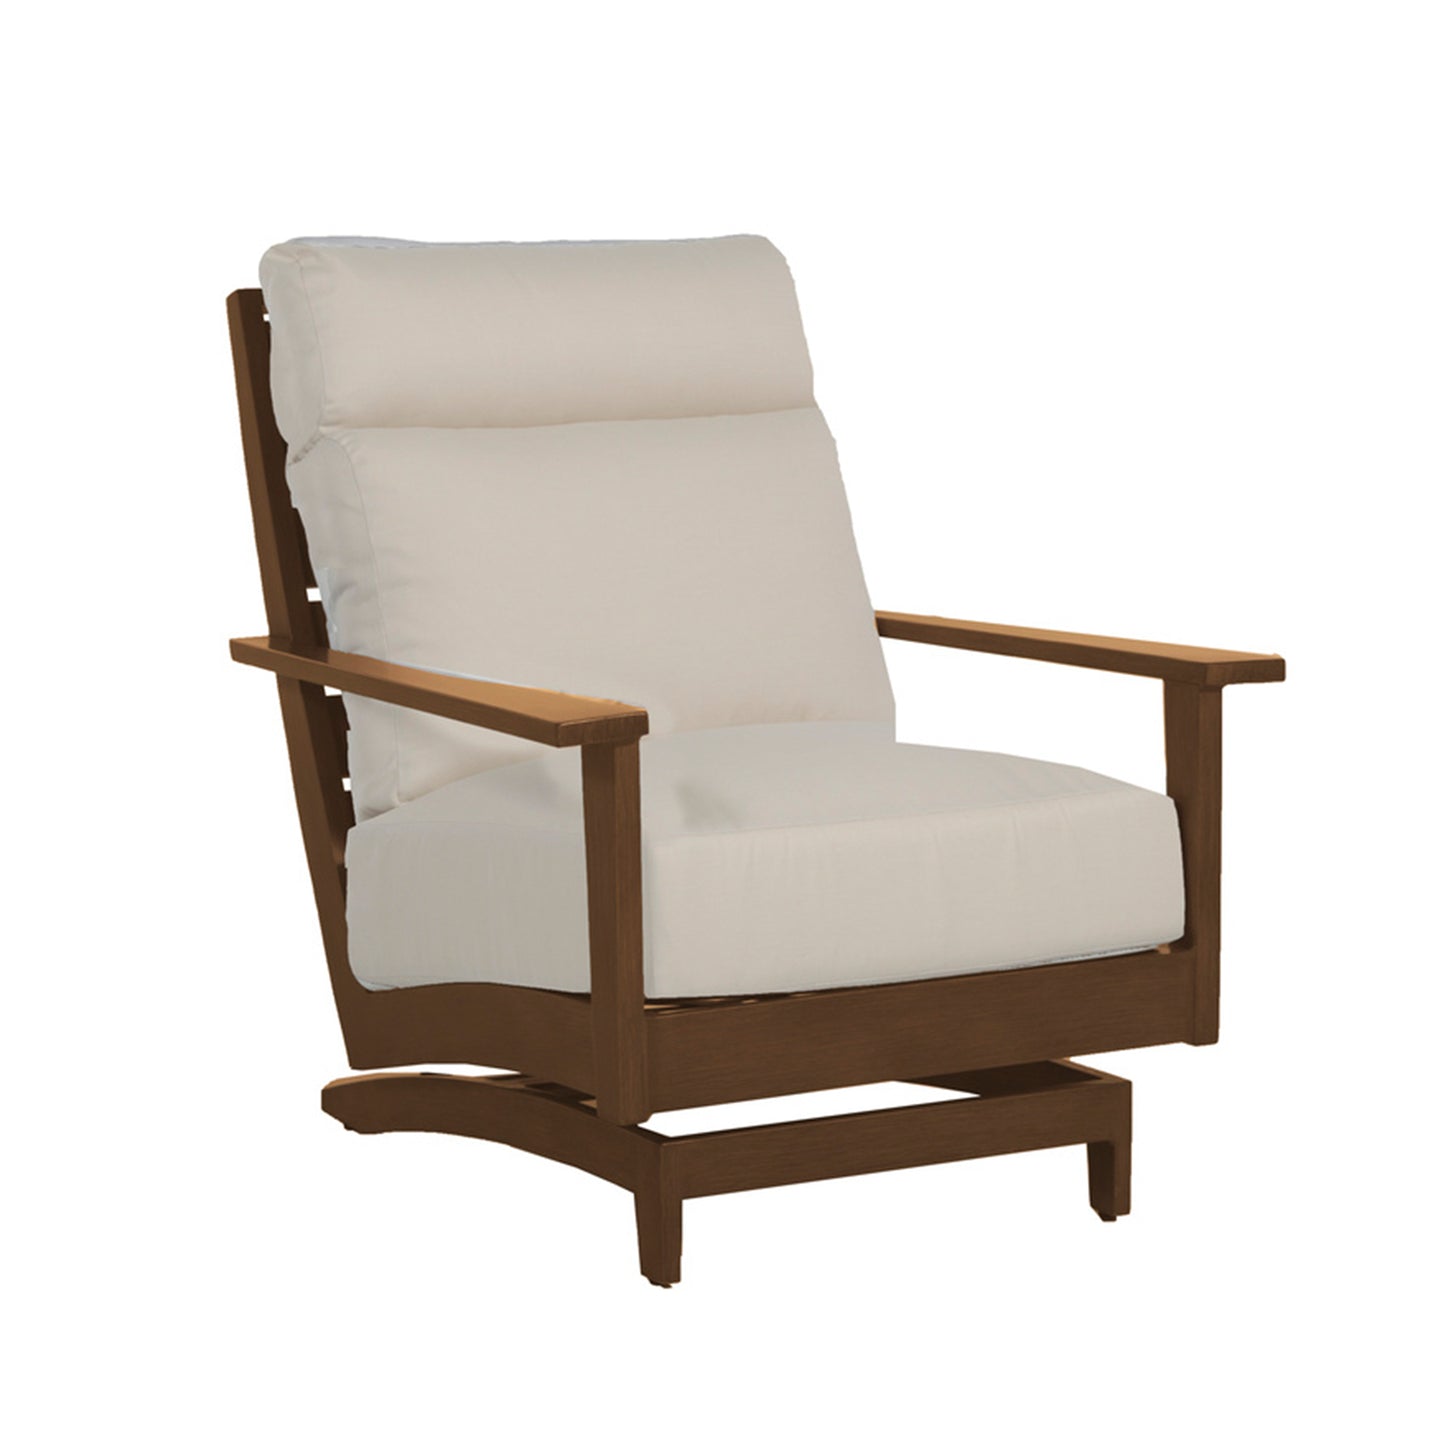 Summer Classics Kennebunkport Spring Lounge Chair